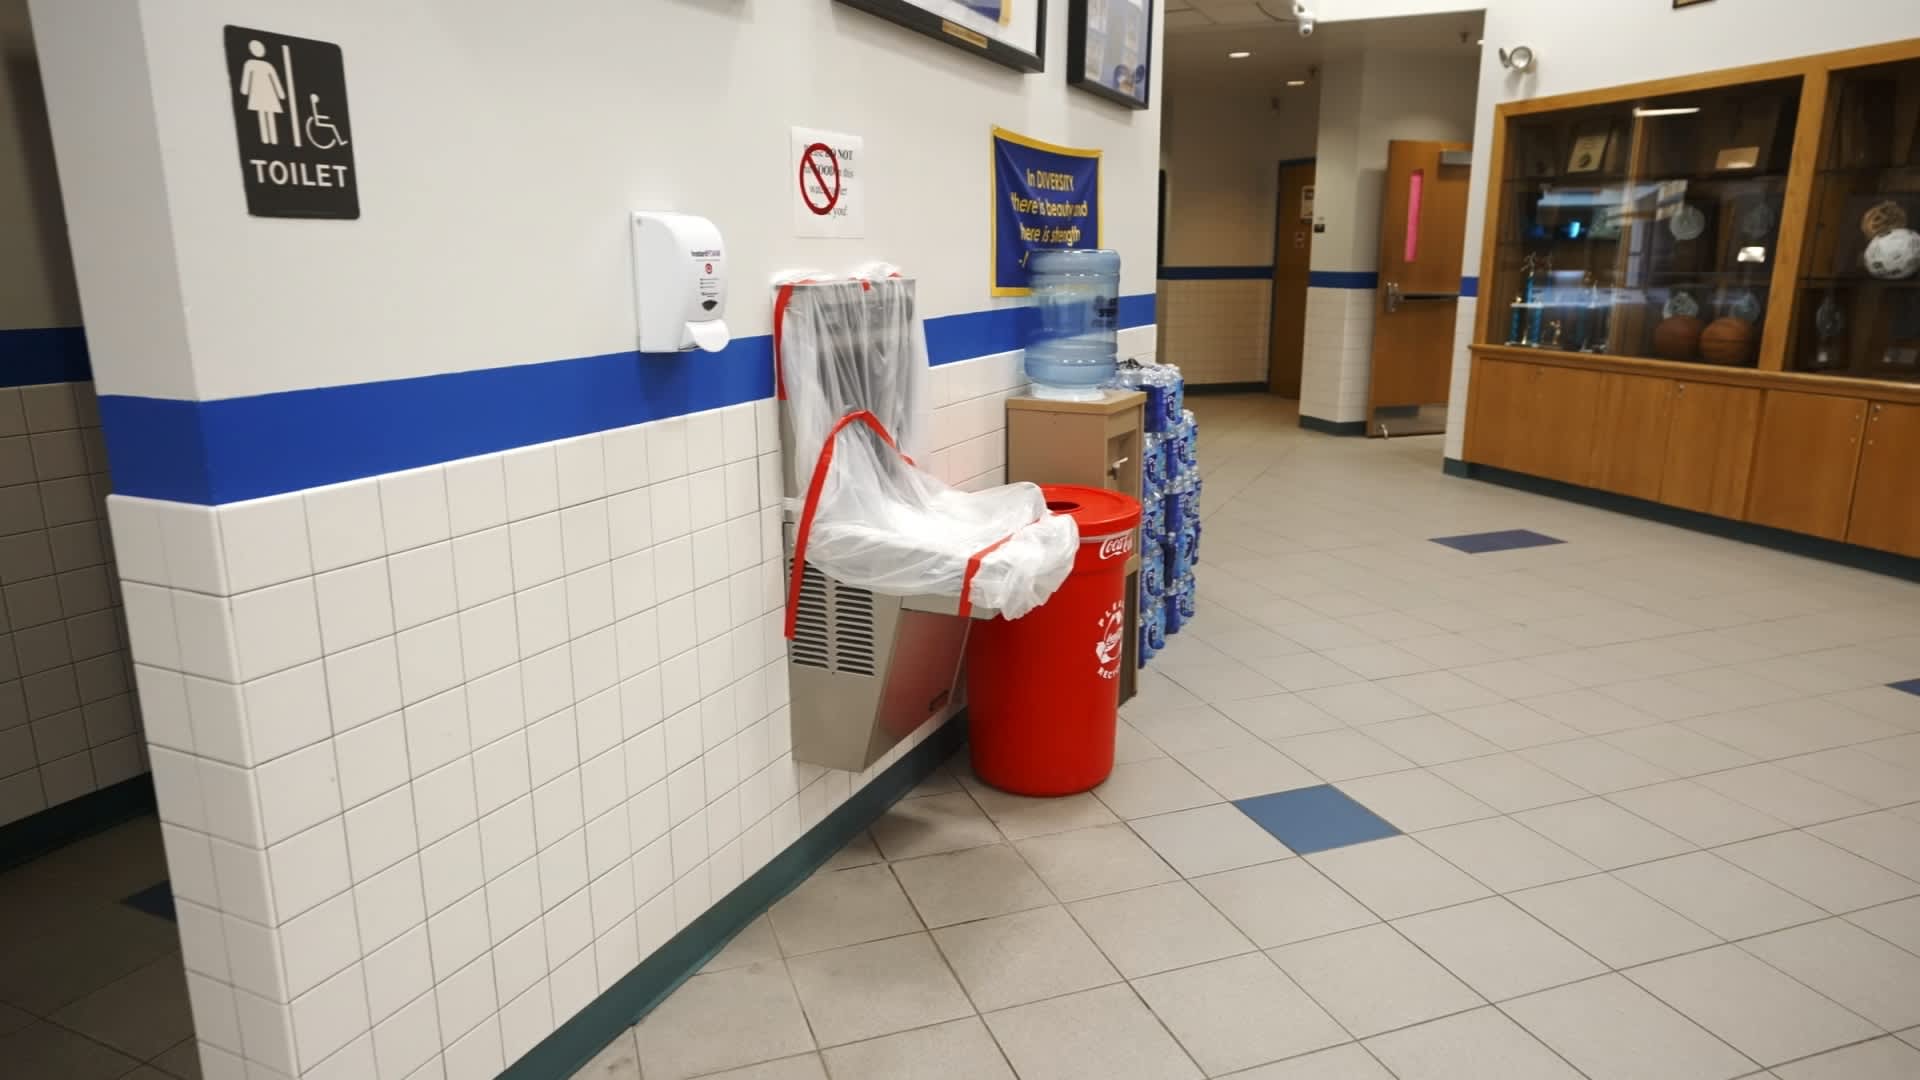 A fountain at Hermon High School in Maine is taped shut after the water tested over the state's safety limit for PFAS chemicals.